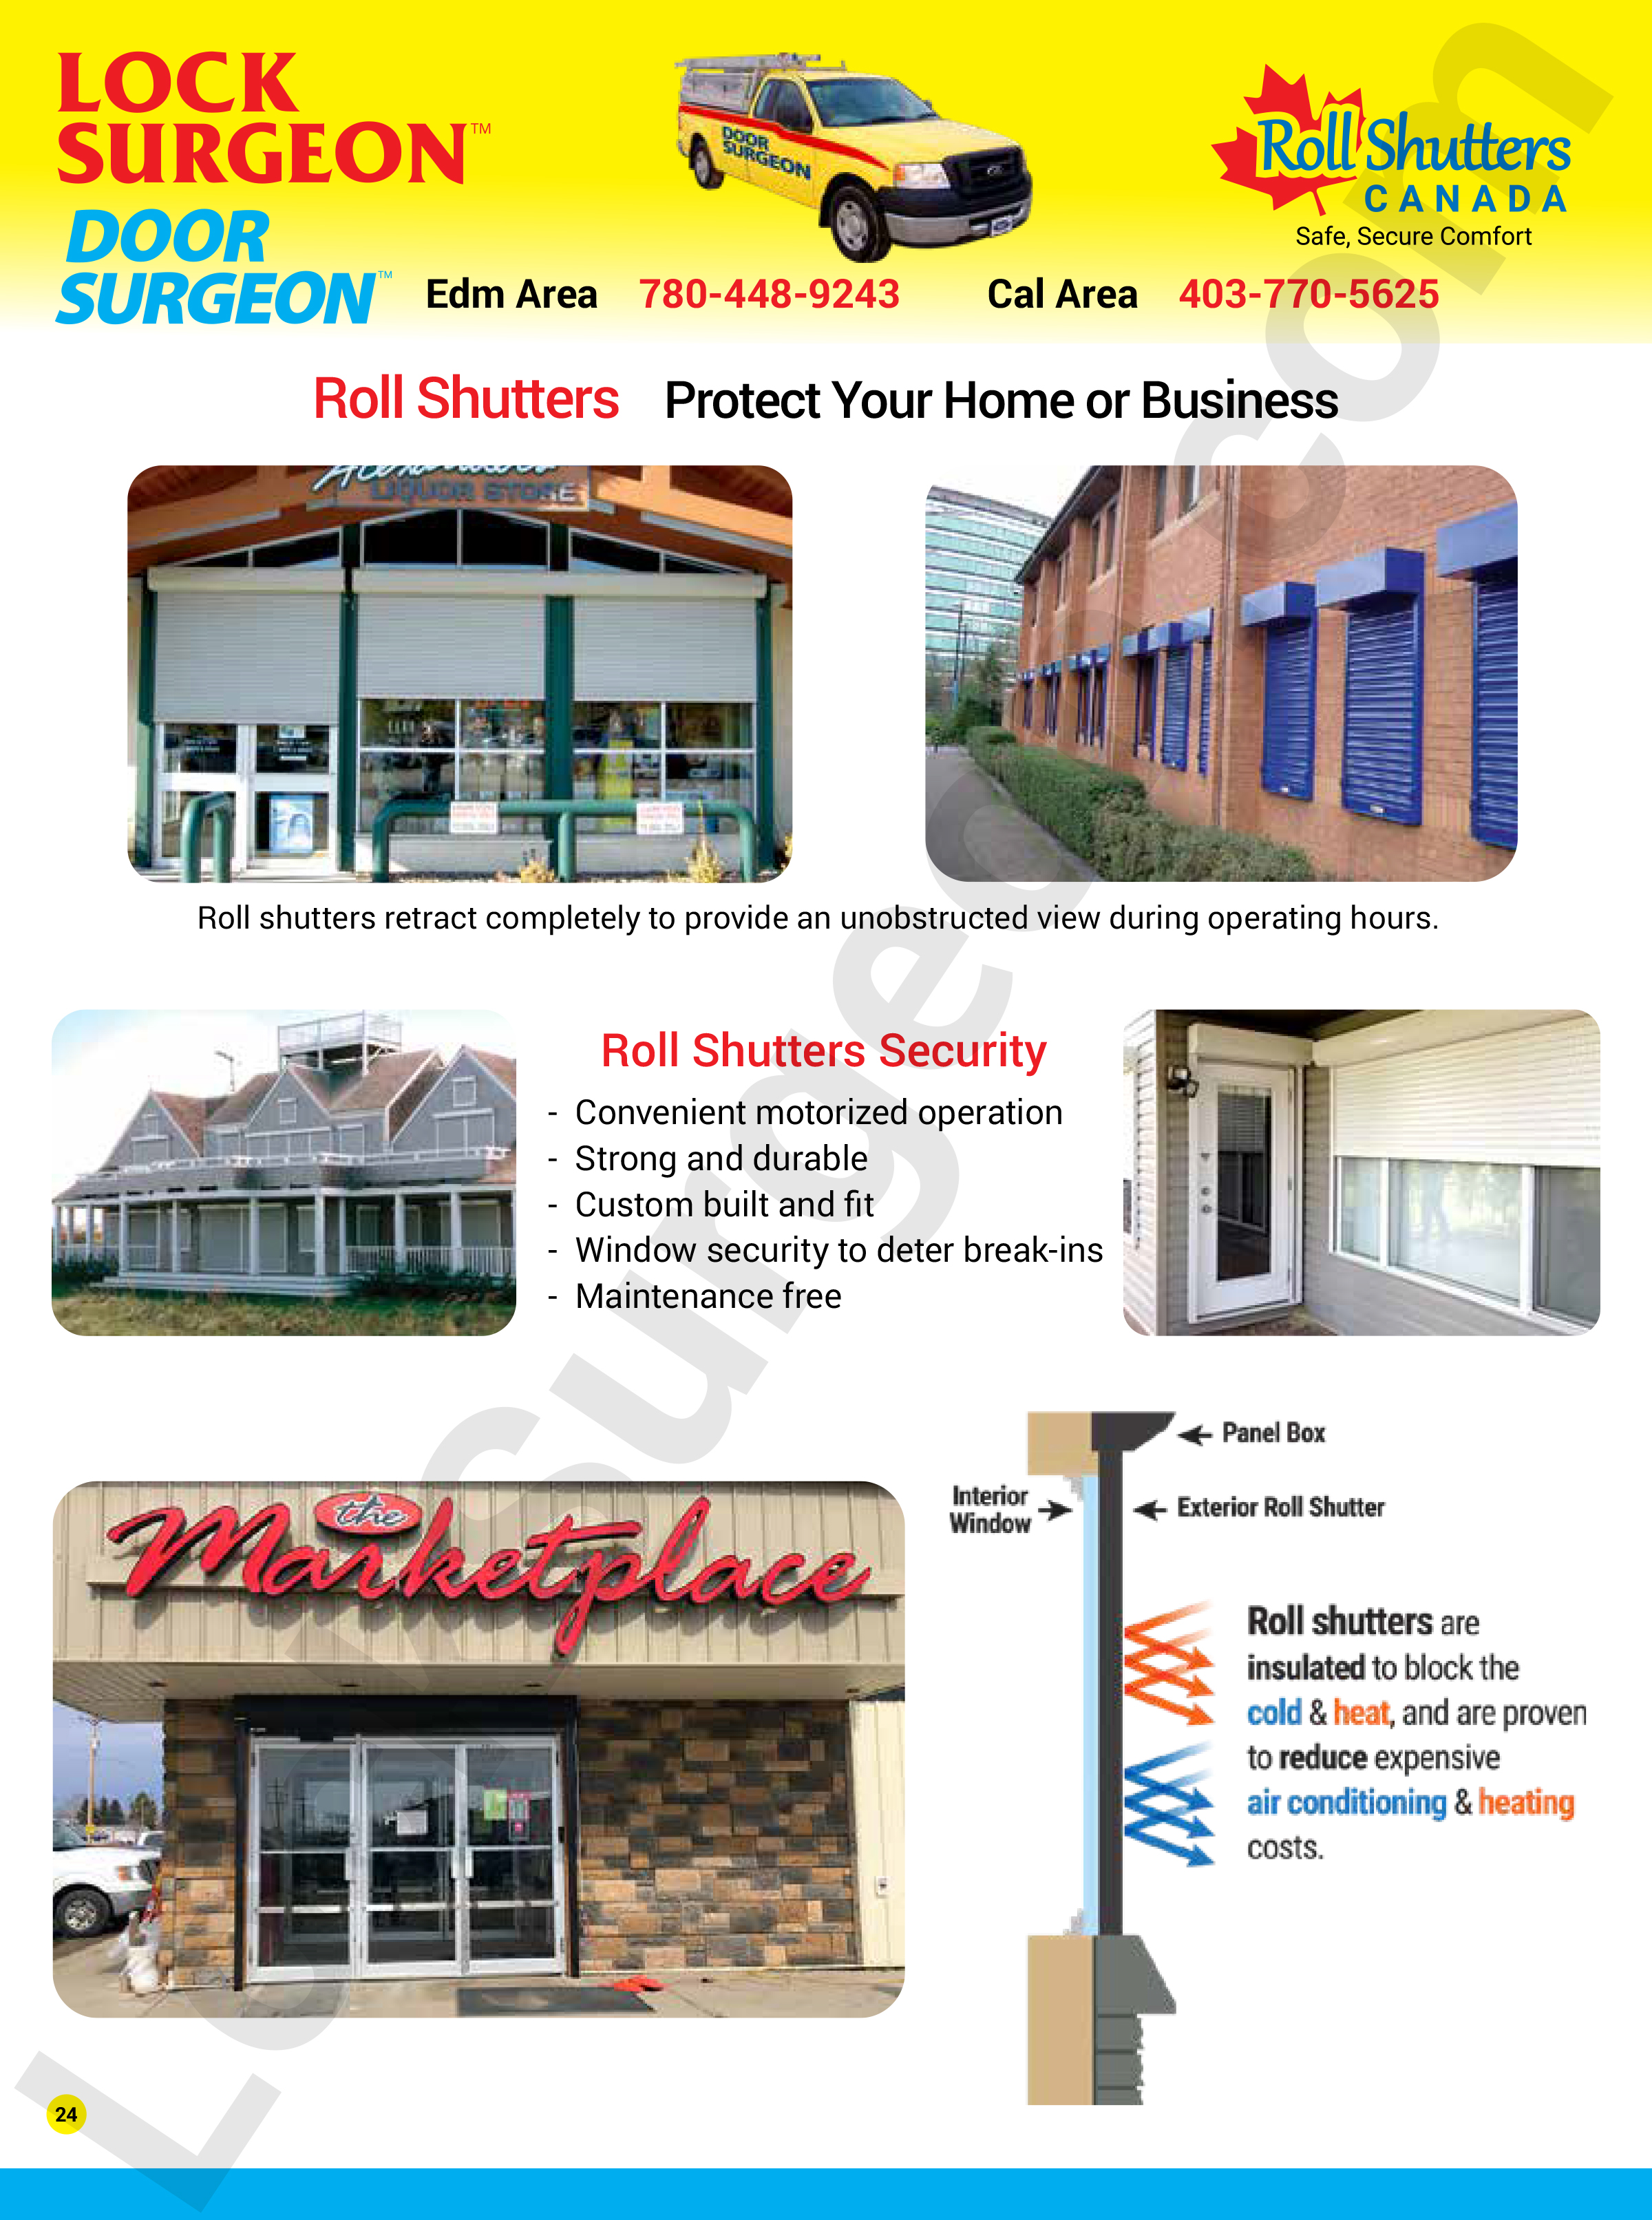 Roll shutter security custom made to fit your windows and doors supplied and installed by Lock Surgeon service technicians. Convenient motorized or manual operation. Strong and durable. Custom built to fit right. Window security to deter break-ins. Maintenance free.